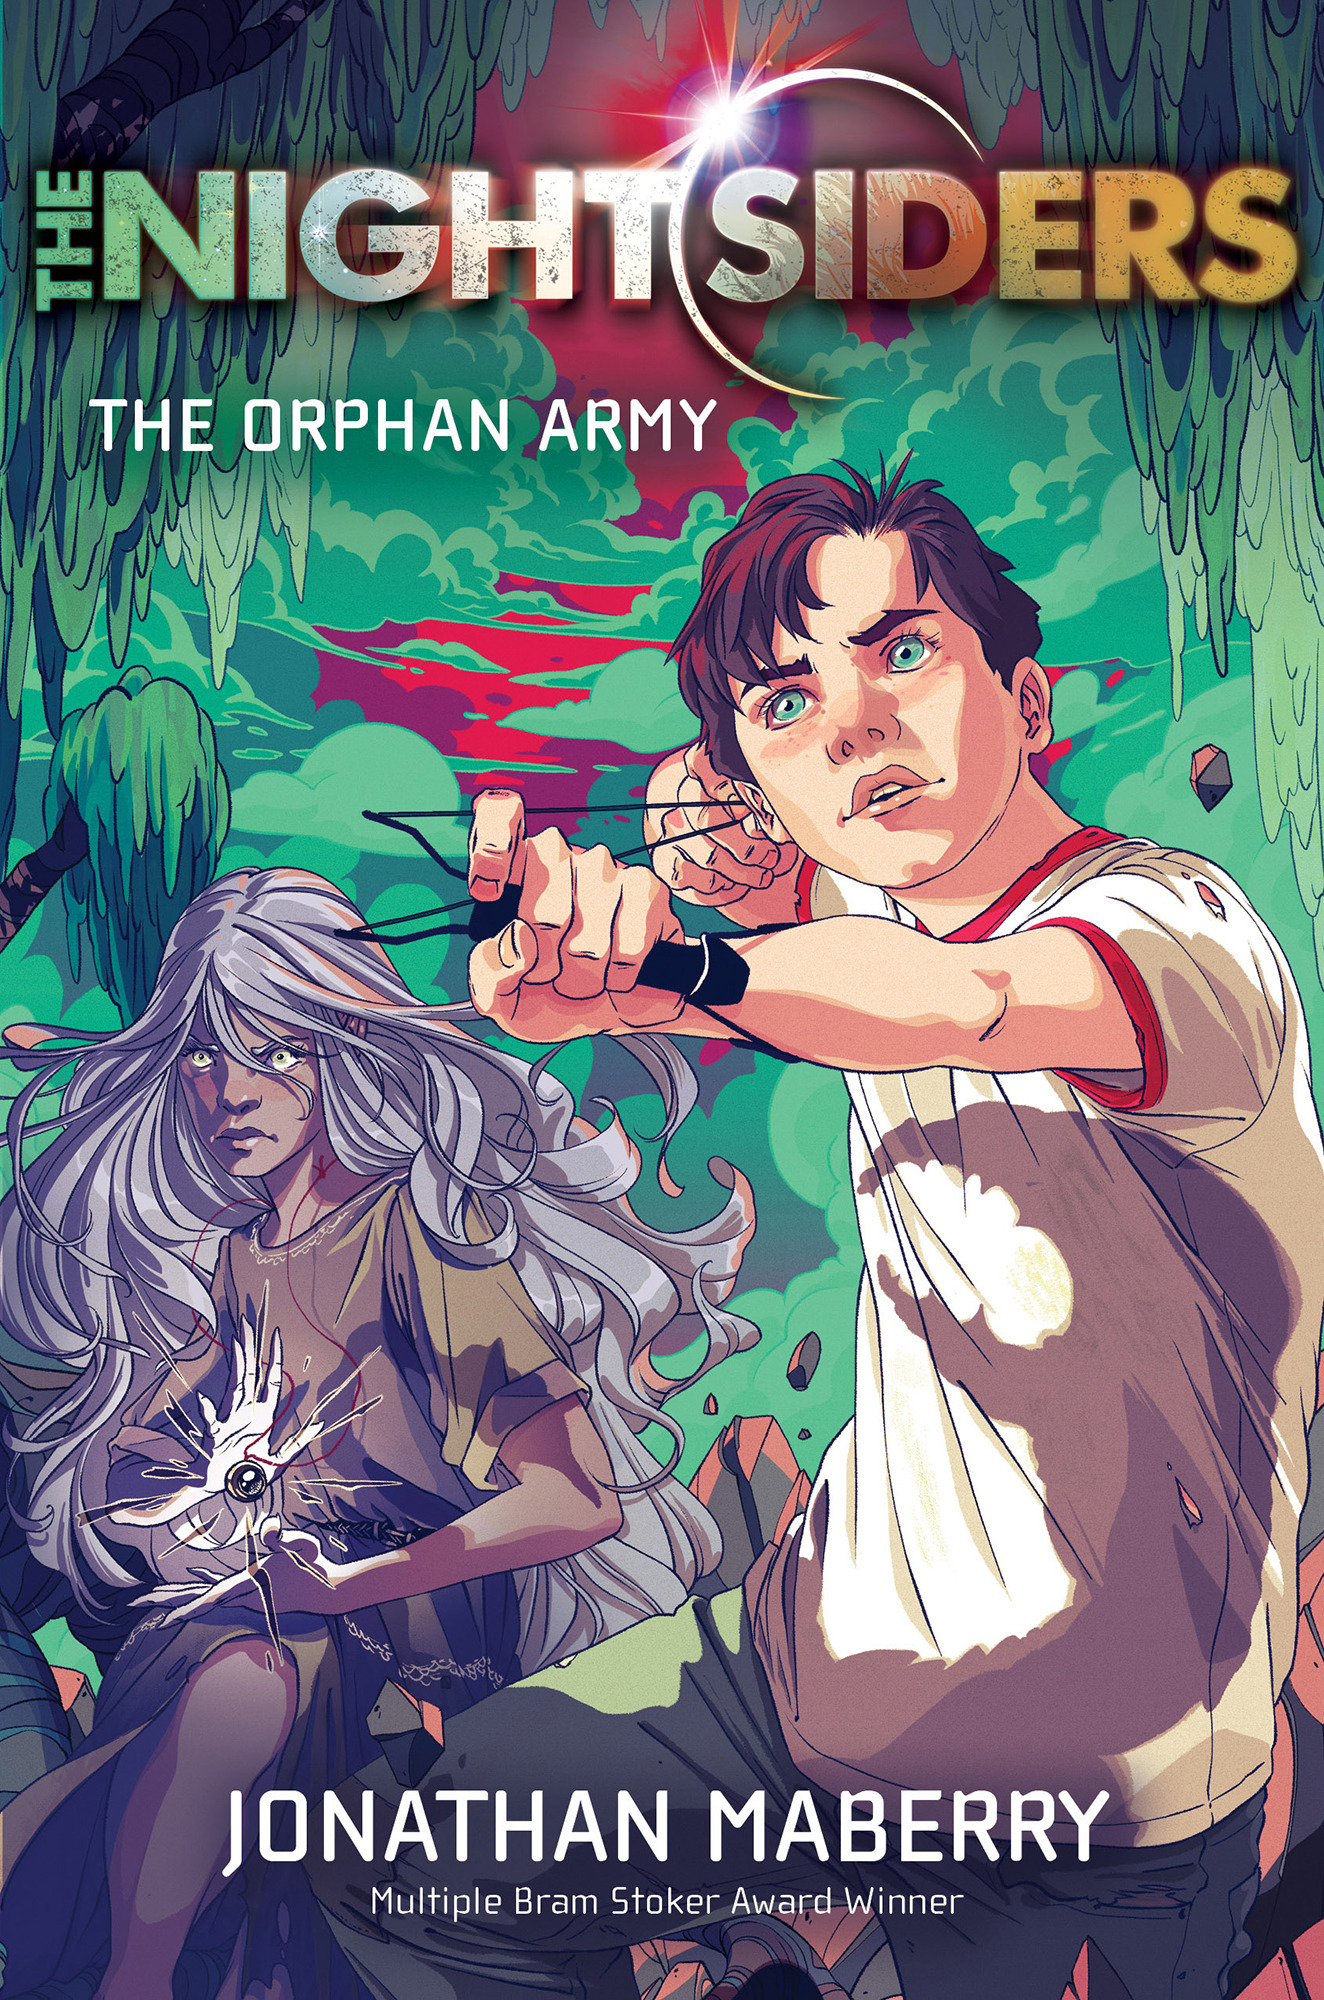 The Orphan Army by Jonathan Maberry